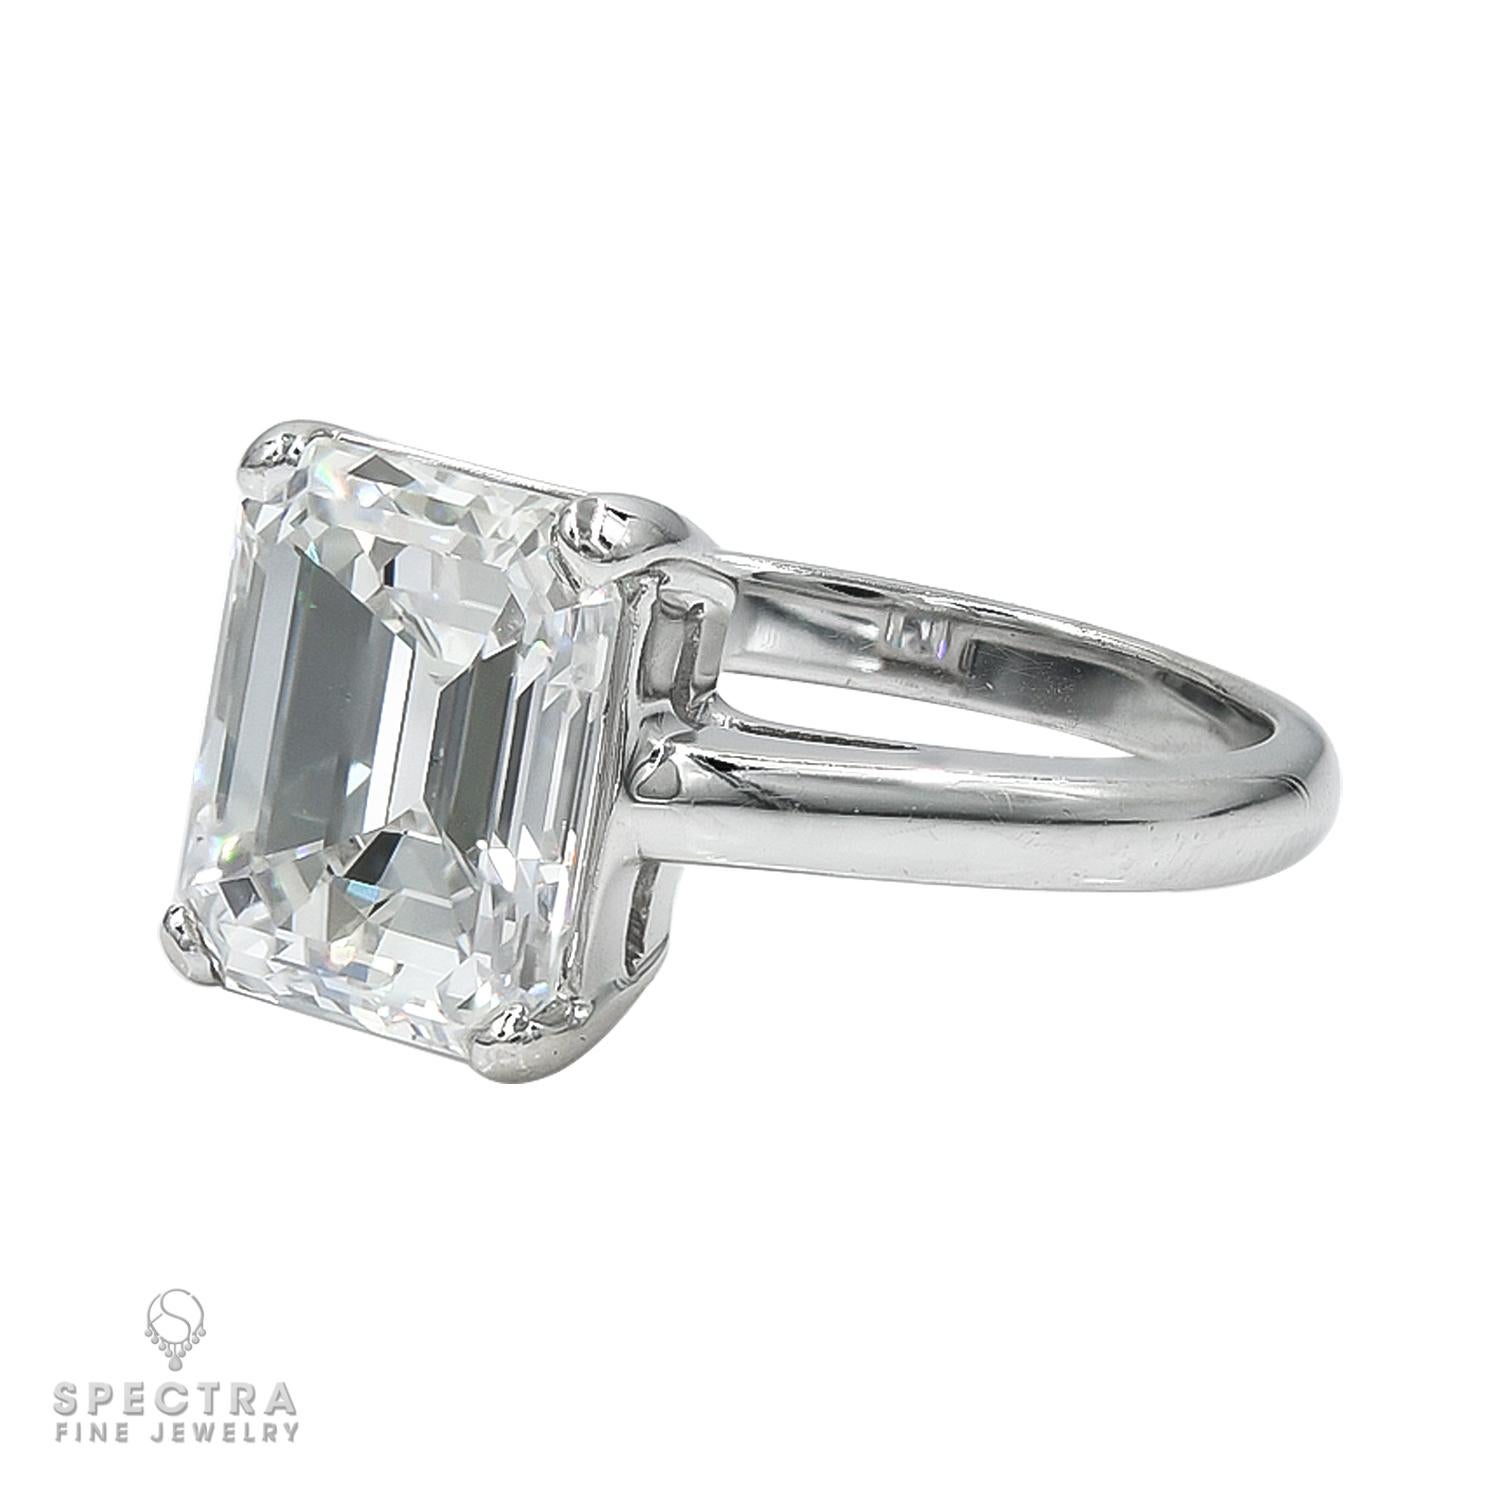 A stunning engagement ring centering on an emerald cut diamond weighing 4.32 carat and mounted in 18k white gold.
The diamond is accompanied by a GIA certificate stating that it's an E color, VS2 clarity.
Weight of the ring is 5.65 grams.
Size 6.75.